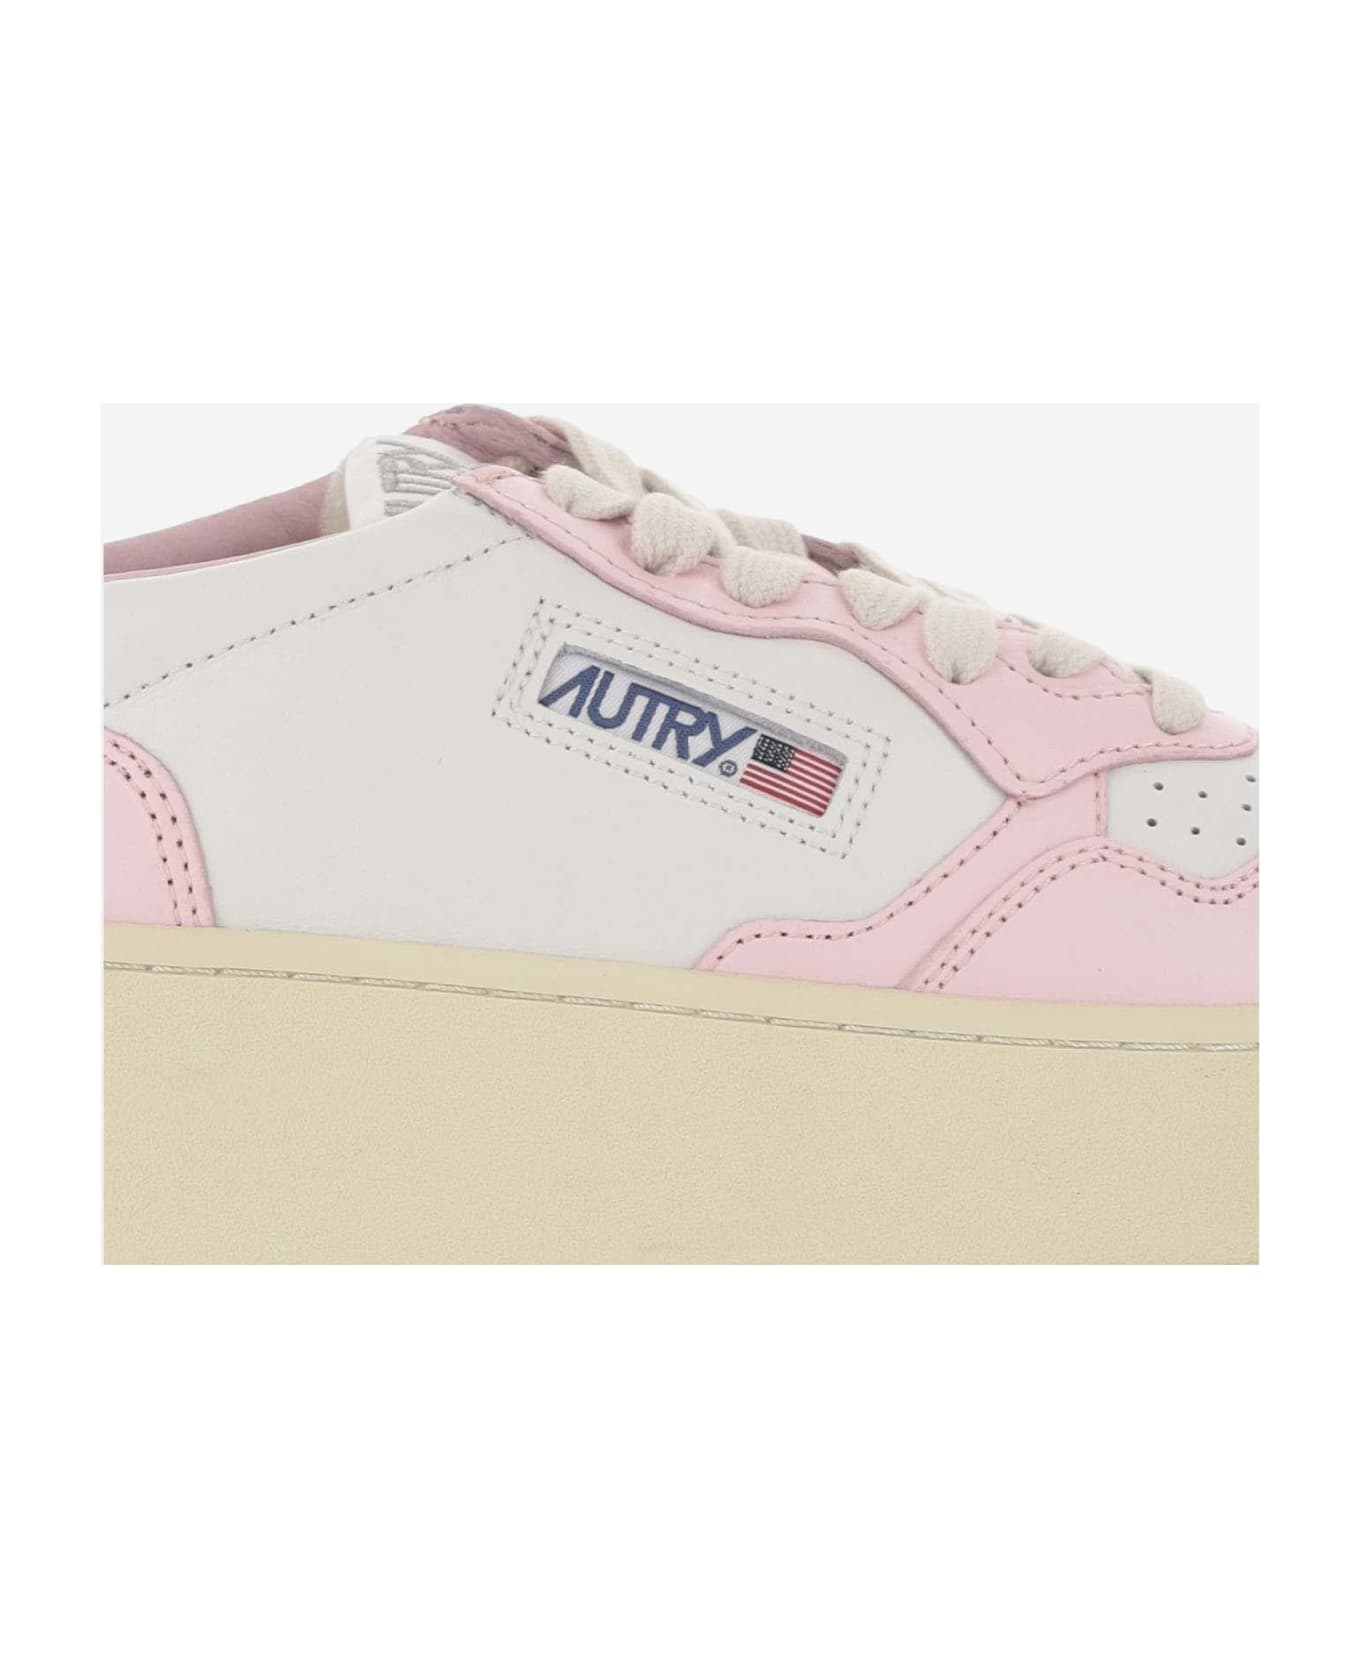 Autry Medalist Platform Low Leather Sneakers - Pink